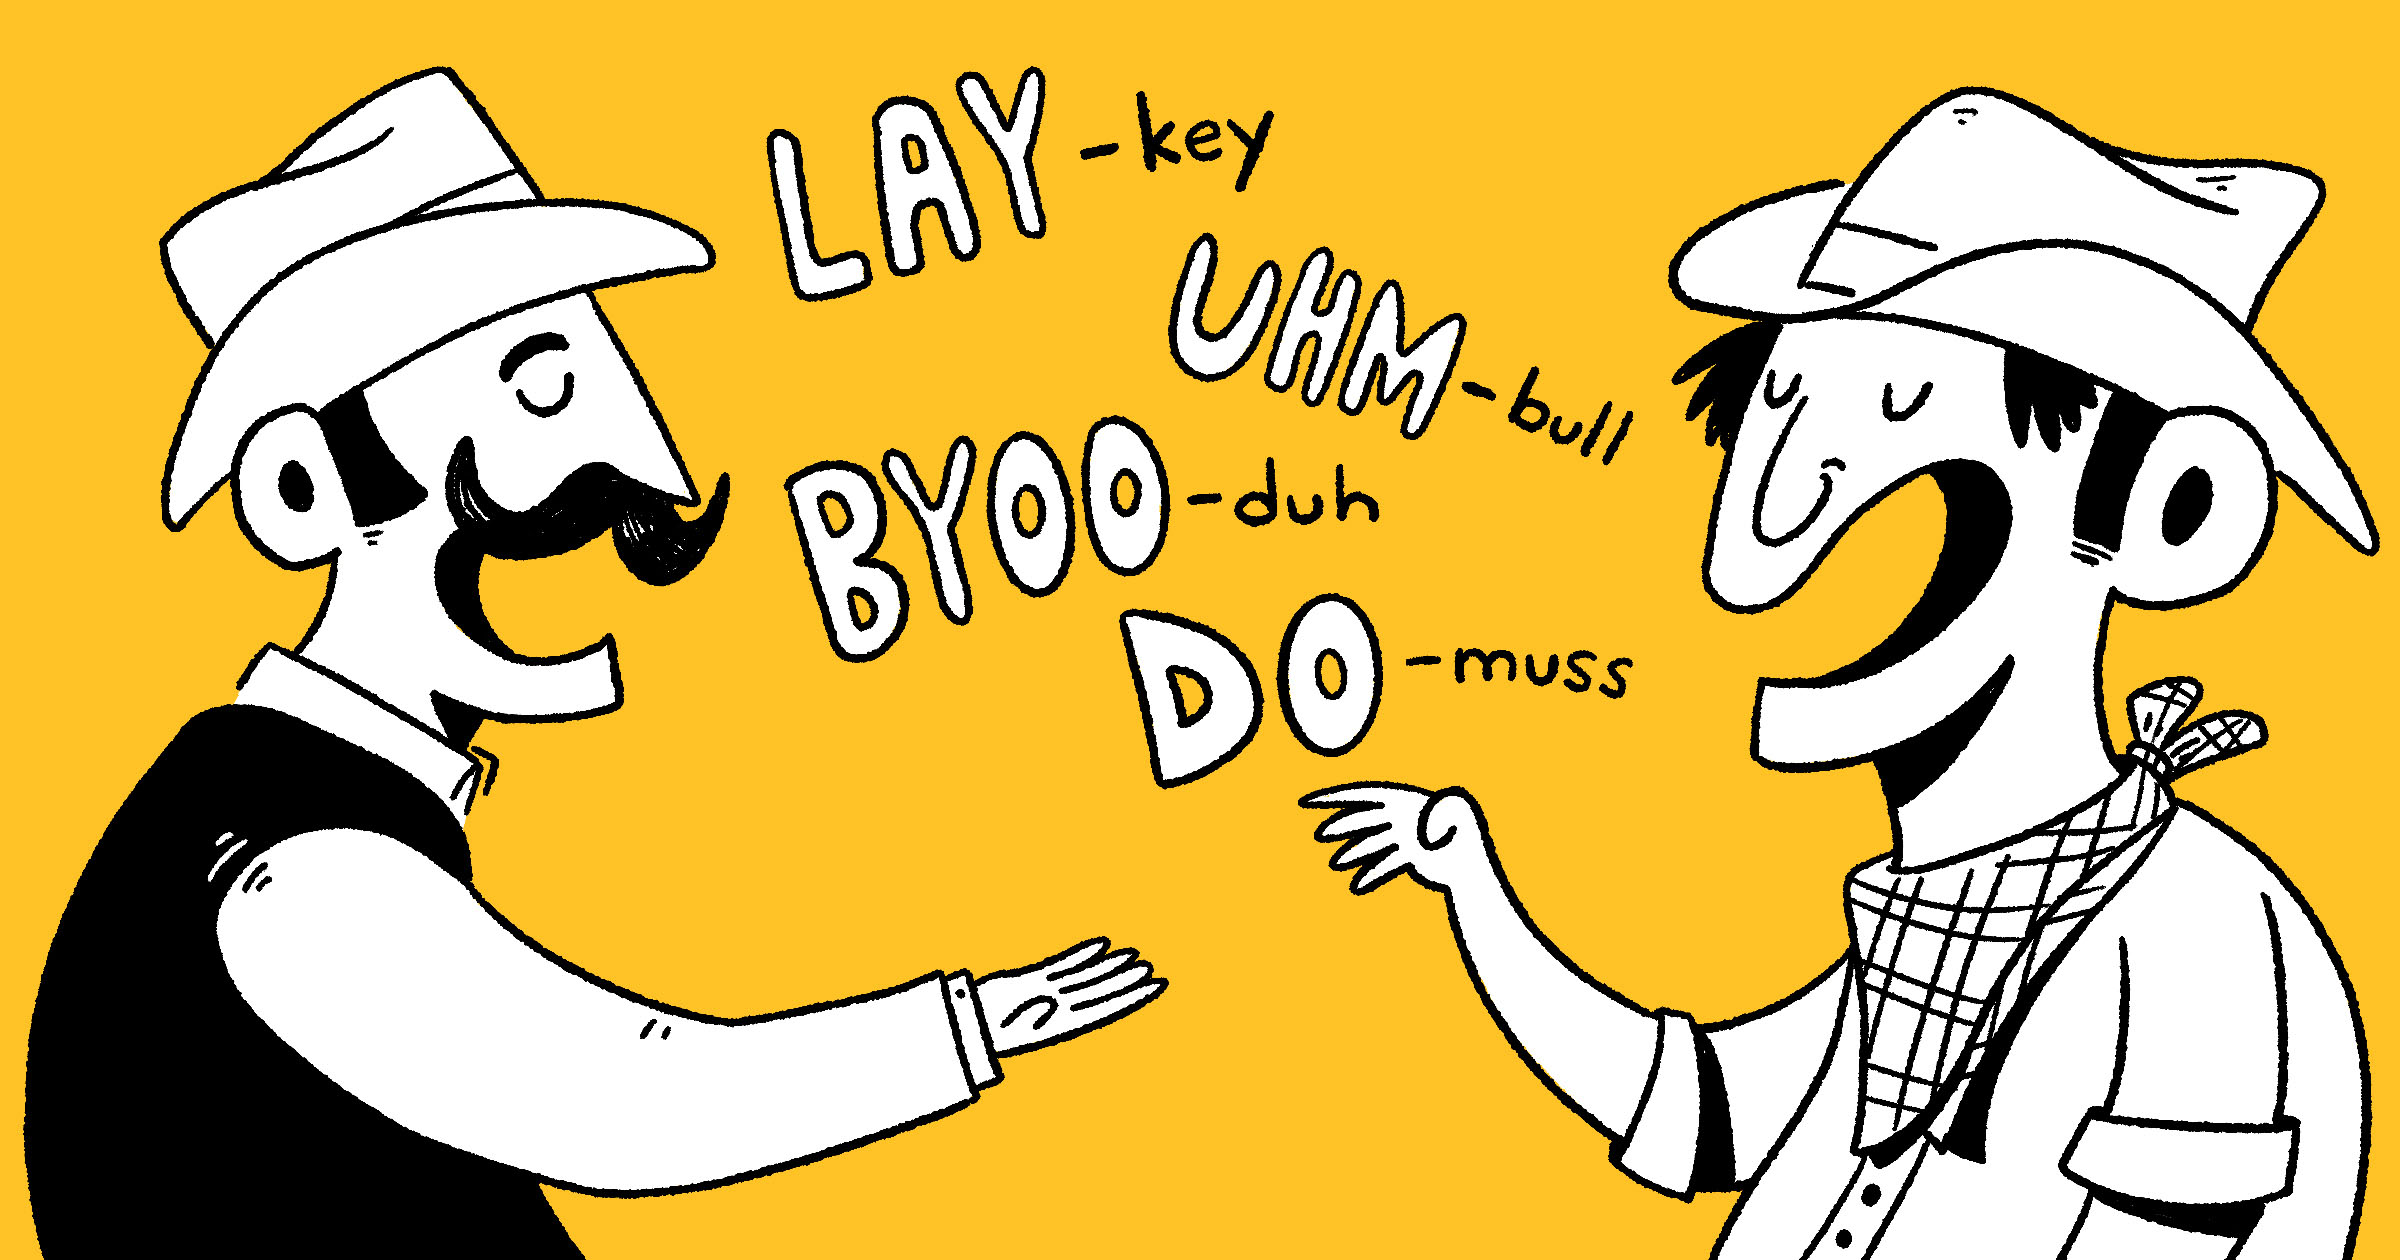 An illustration of two men in cowboy hats talking with funny pronunciations like lay-key and byoo-dah